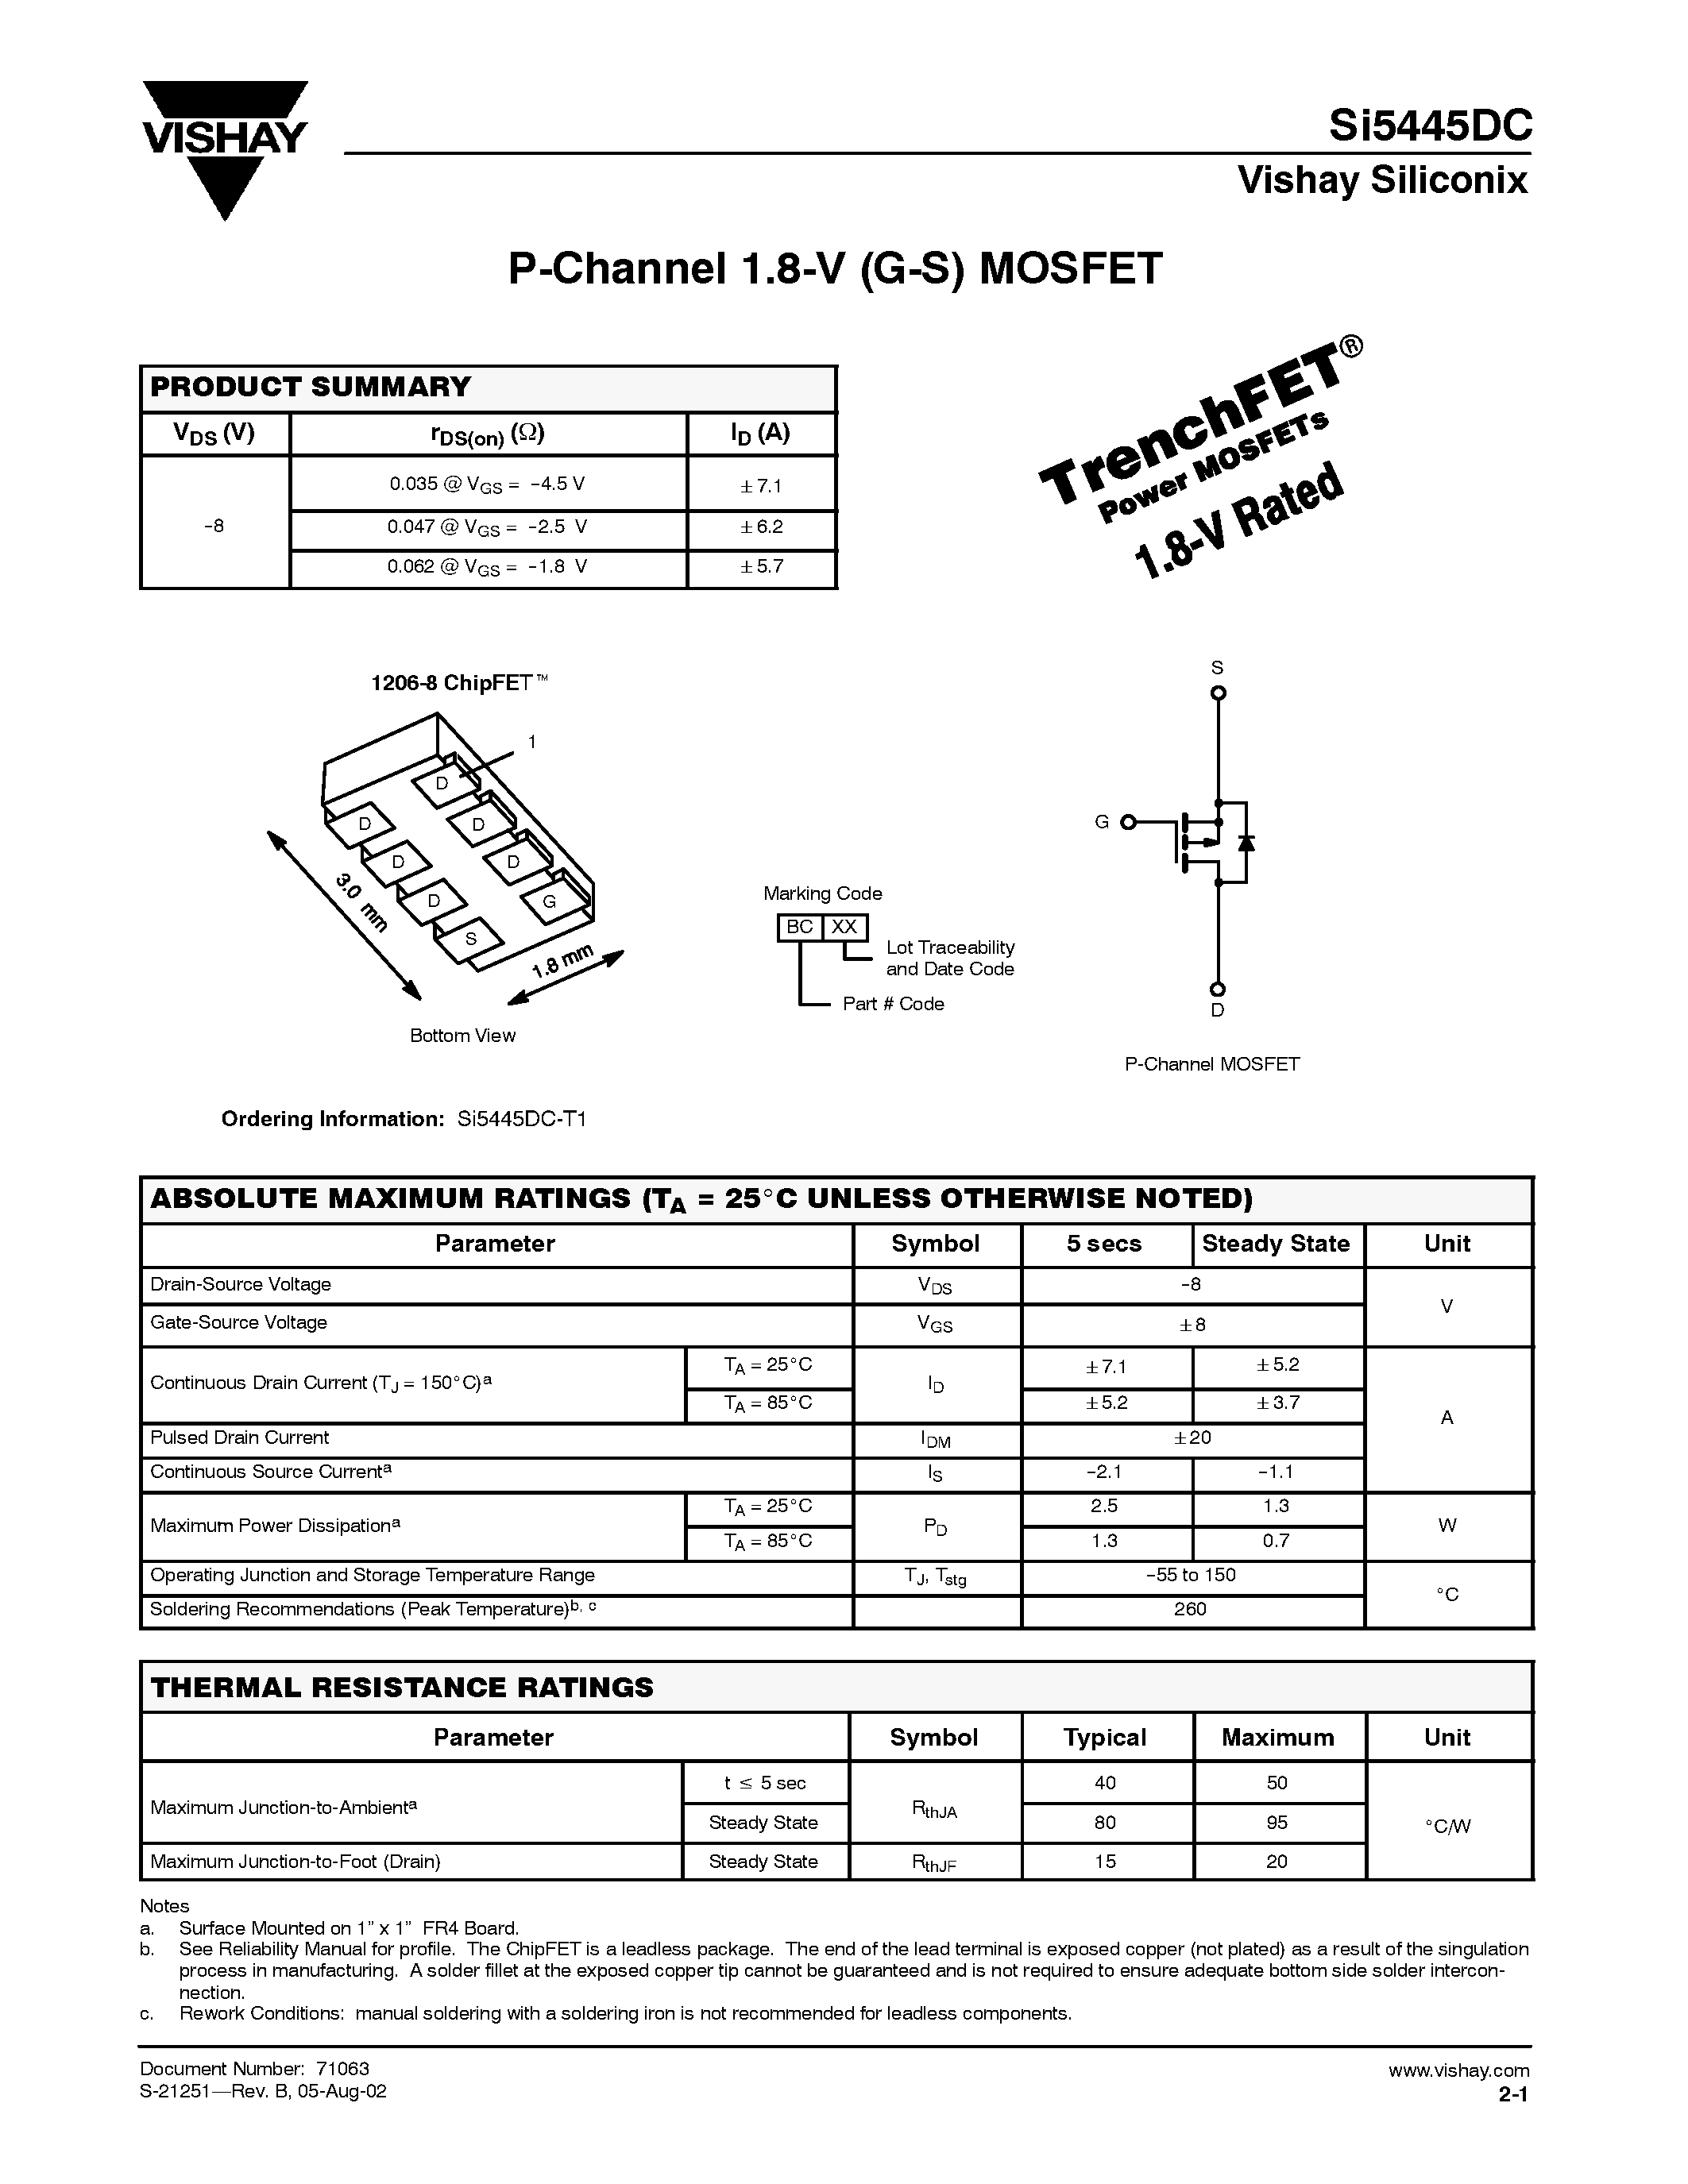 Даташит SI5445DC - P-Channel 1.8-V (G-S) MOSFET страница 1